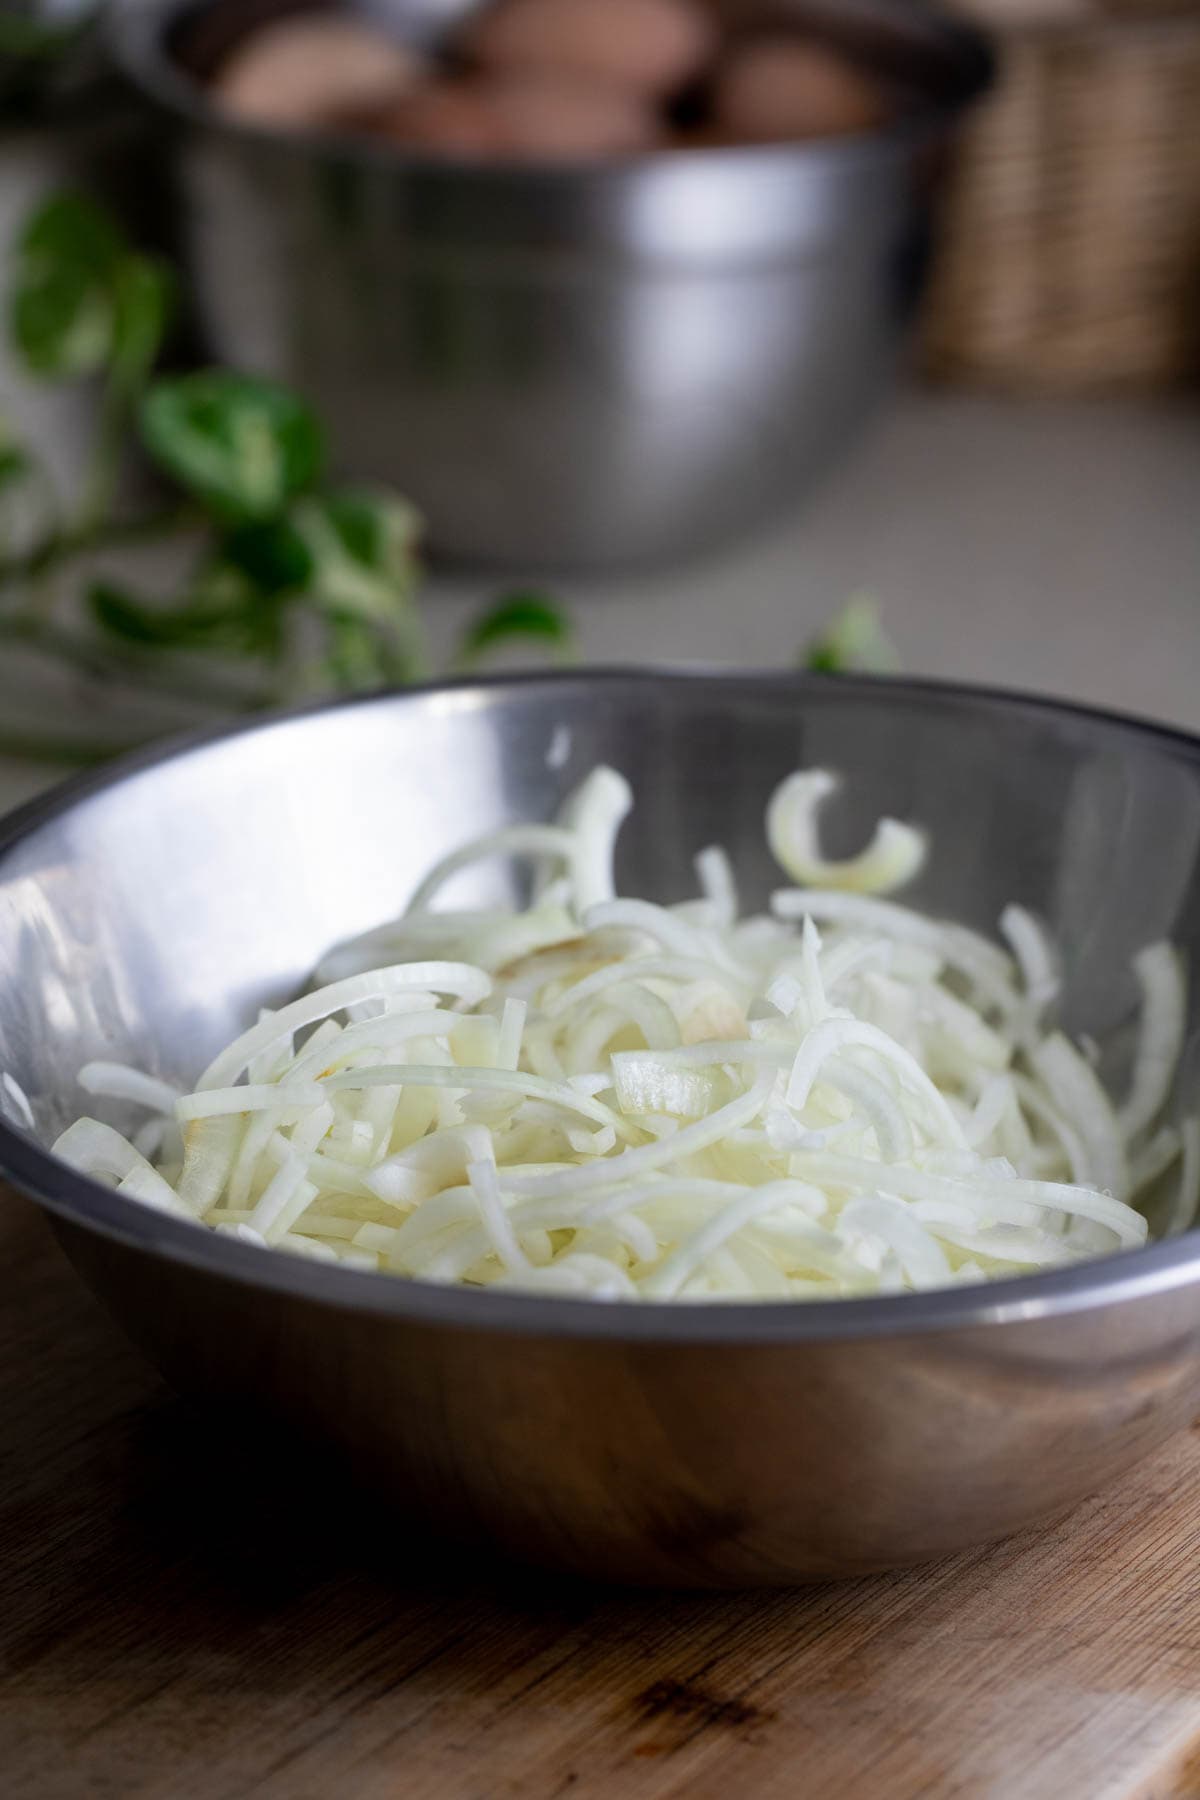 place all the onion pieces in a bowl